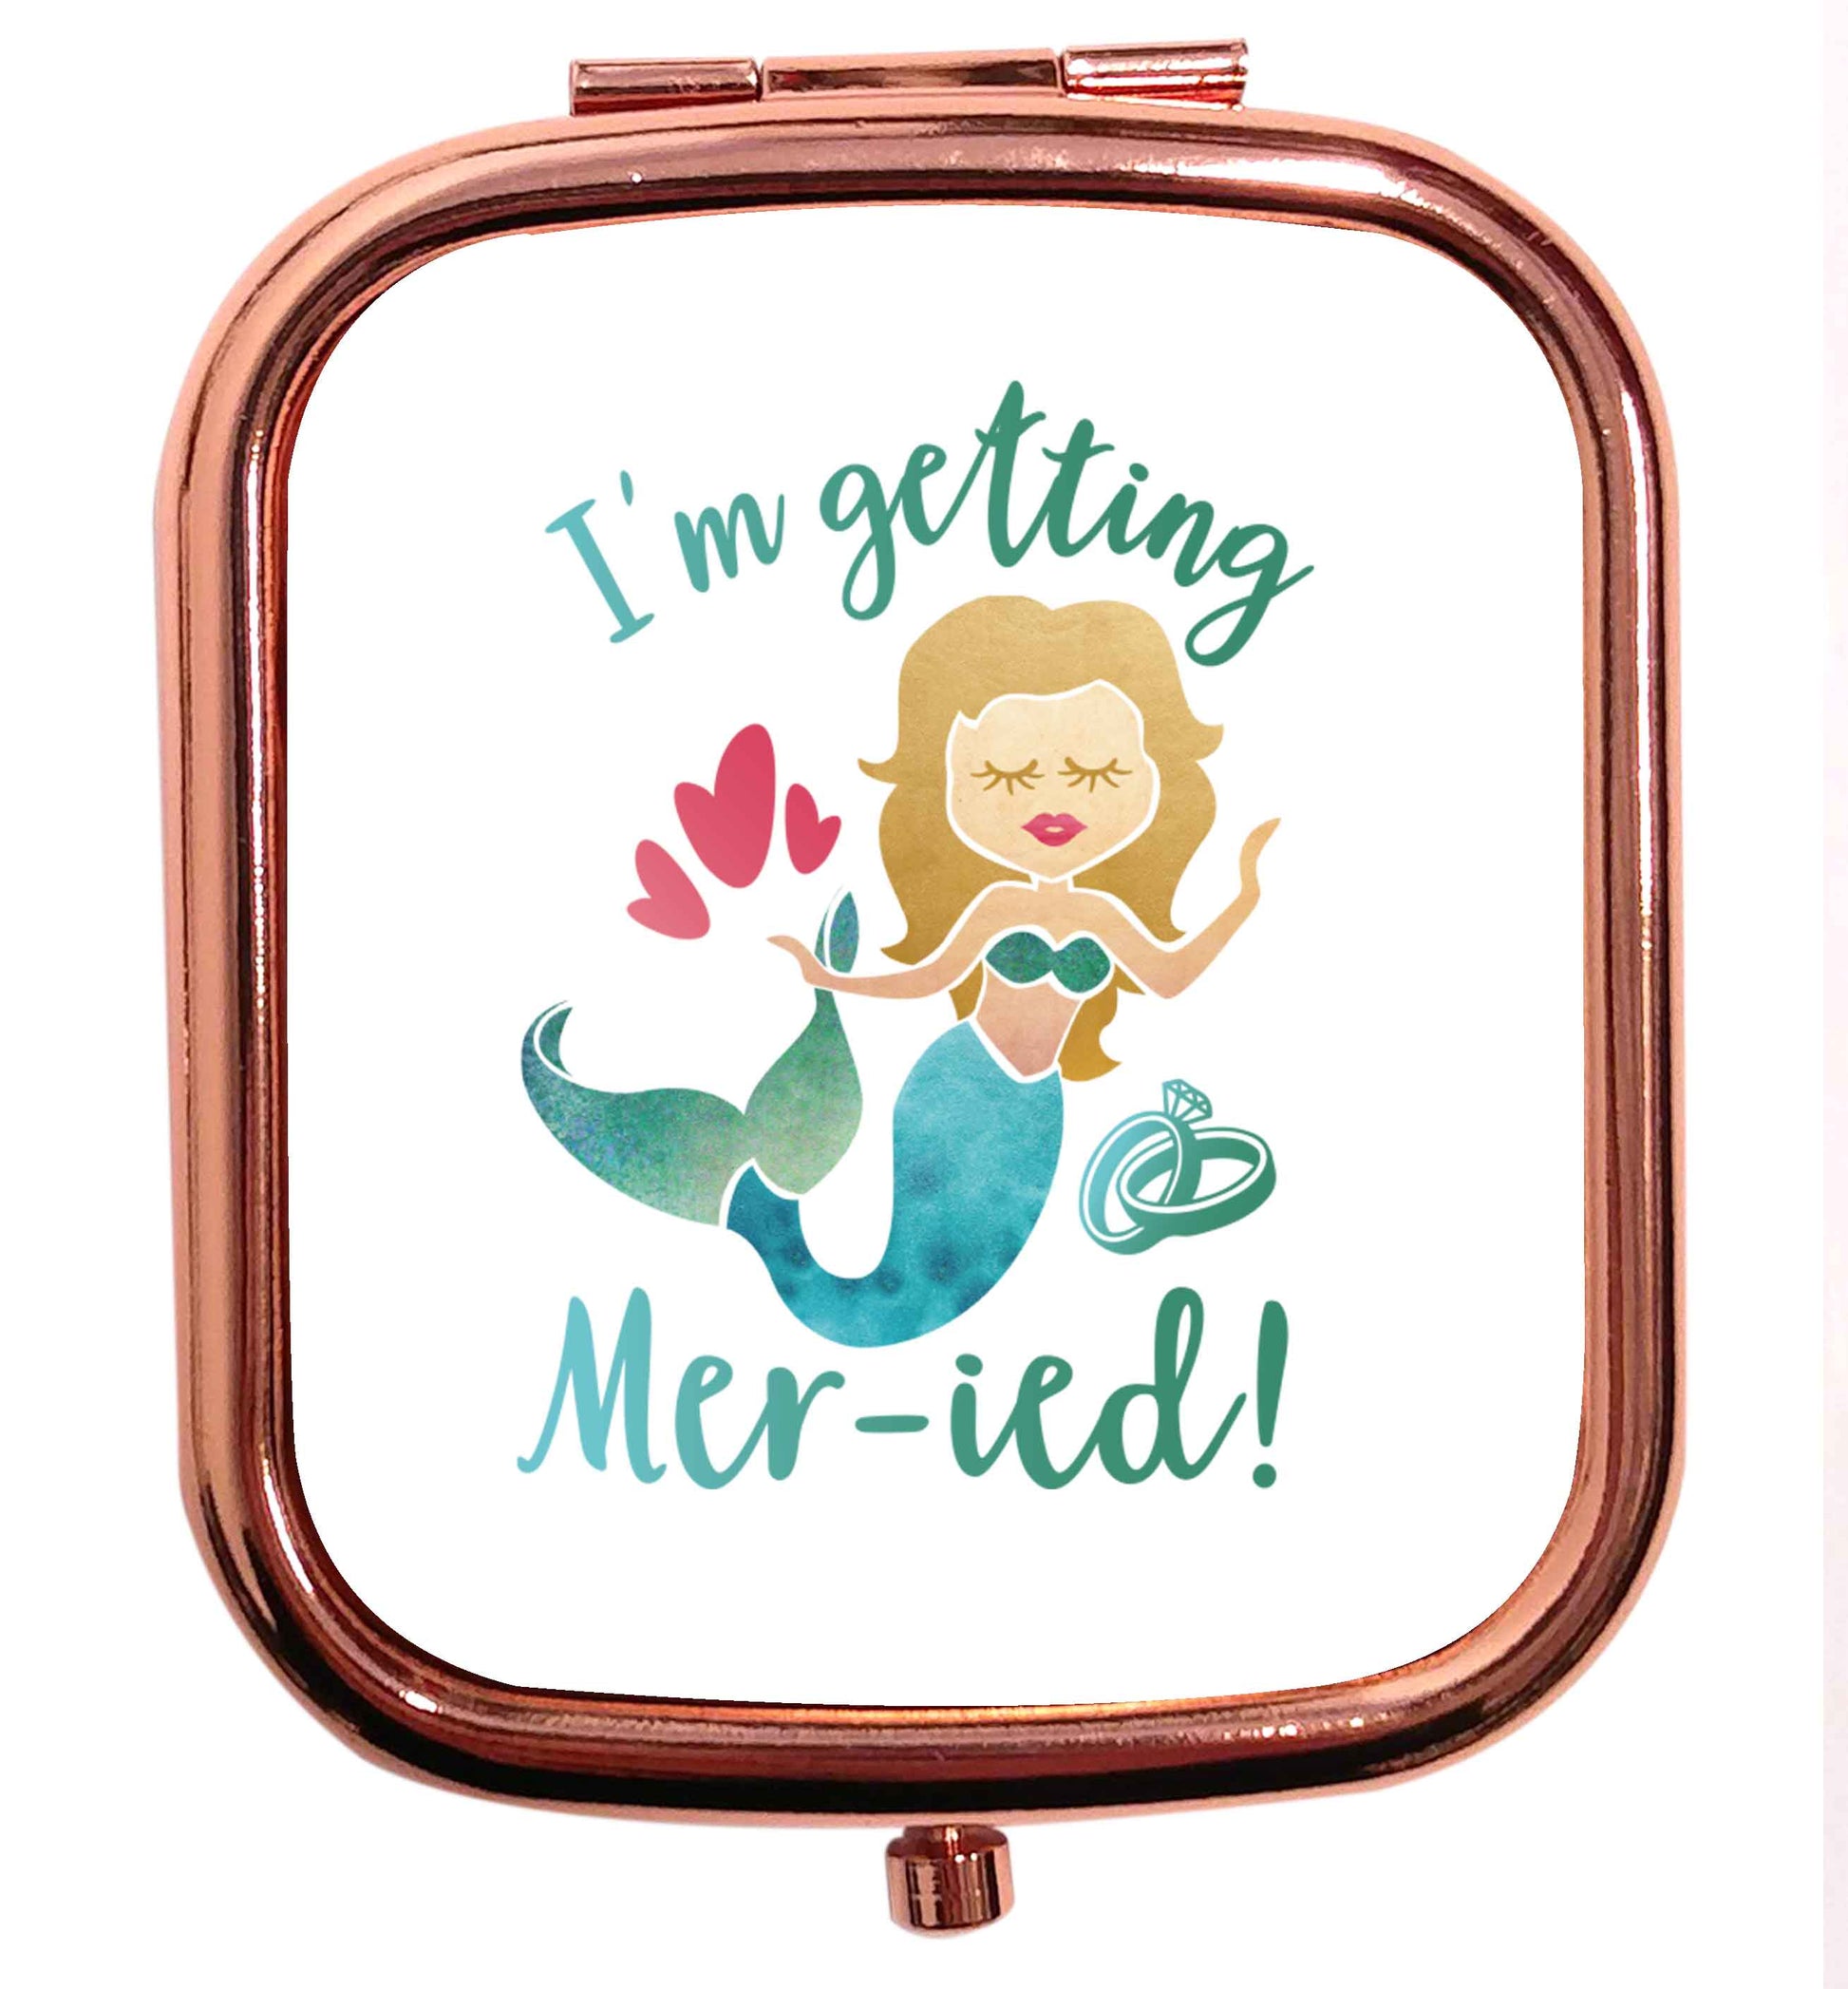 Personalised wedding thank you's Mr and Mrs wedding and date! Ideal wedding favours! rose gold square pocket mirror